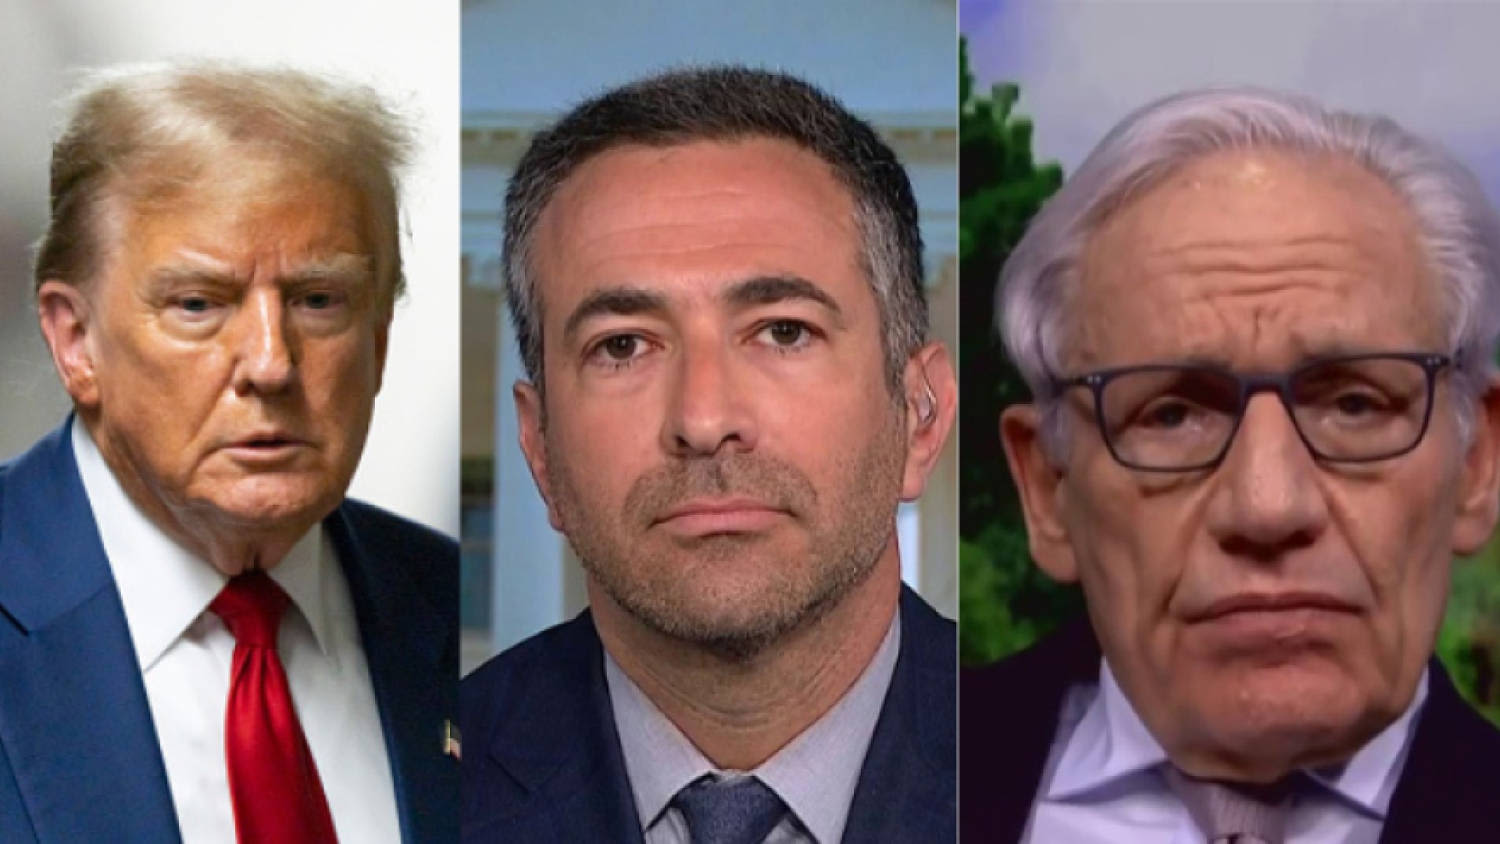 GUILTY! See Trump’s conviction broken down by Watergate icon Bob Woodward with Ari Melber